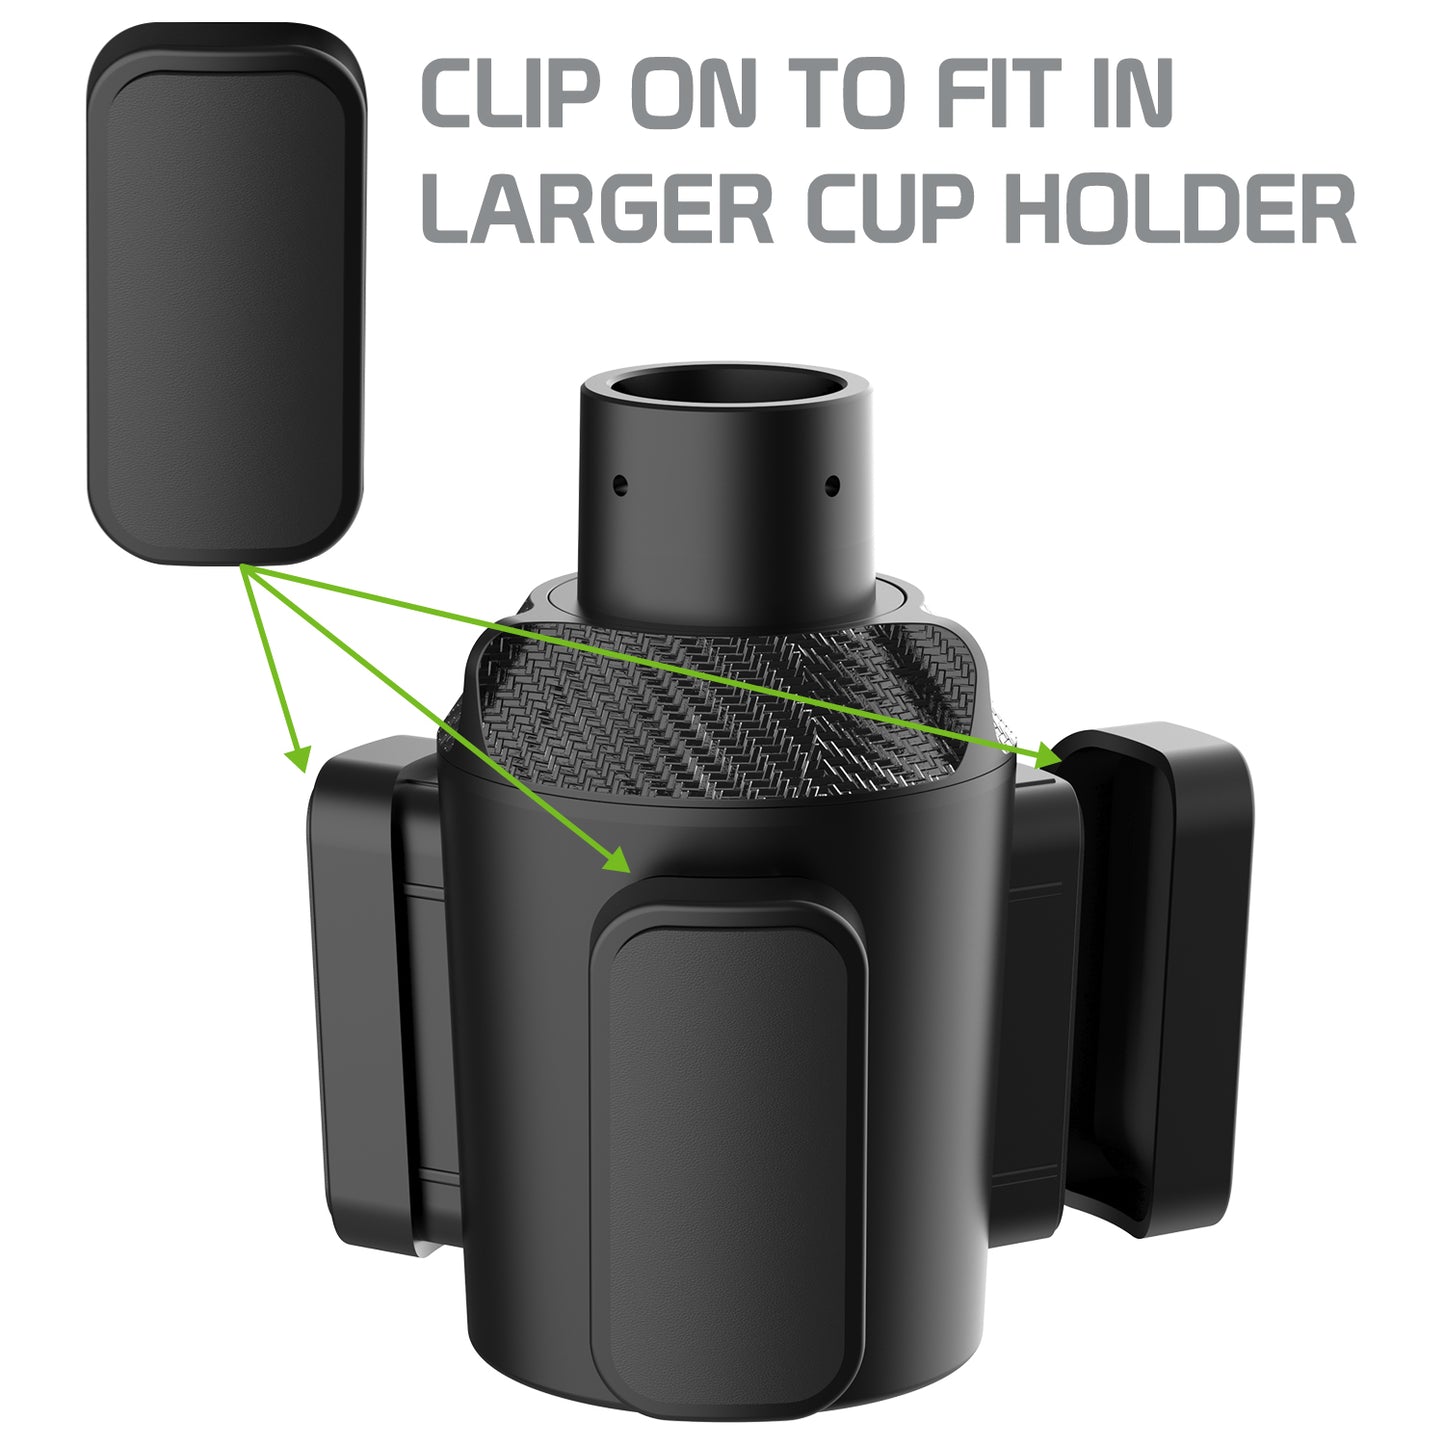 PHCUP1 - Heavy-Duty Expandable Car Cup Holder, Adjustable Top Opening & Base